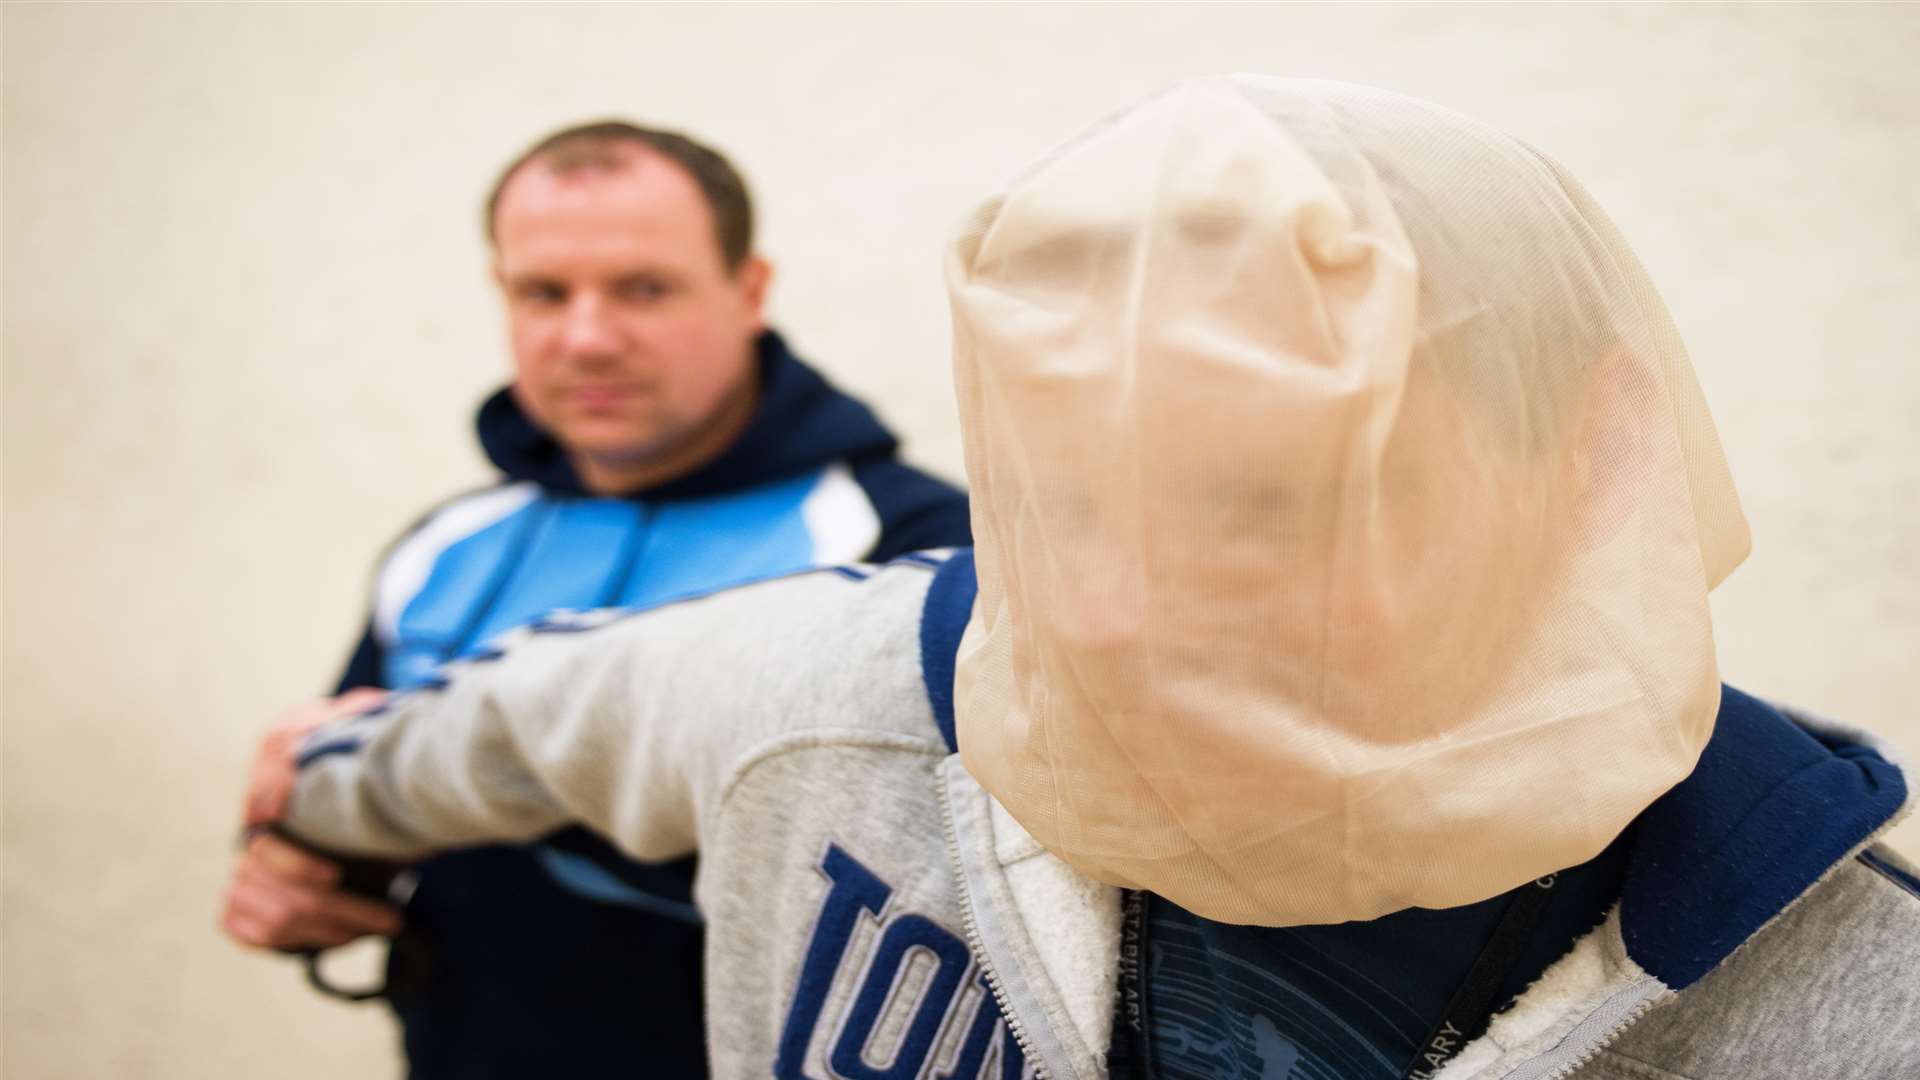 Police are to be given spit hoods. Library image: Herts Police.